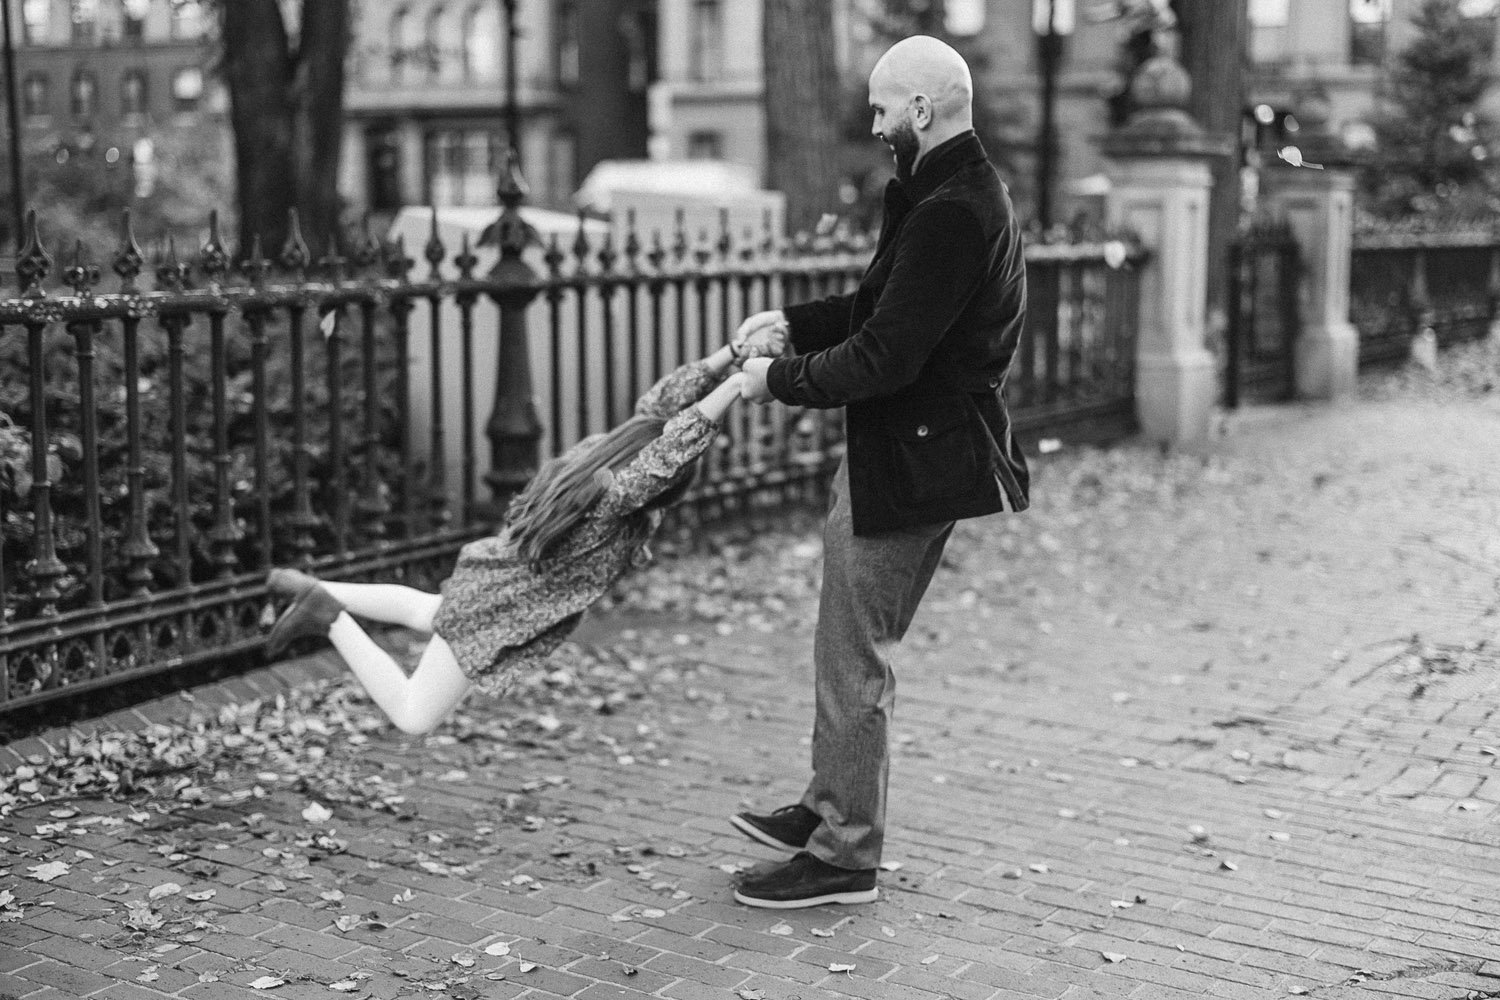 dad-swinging-daughter-in-air-fall-monochrome-family-photographer-autumn-skye.jpg